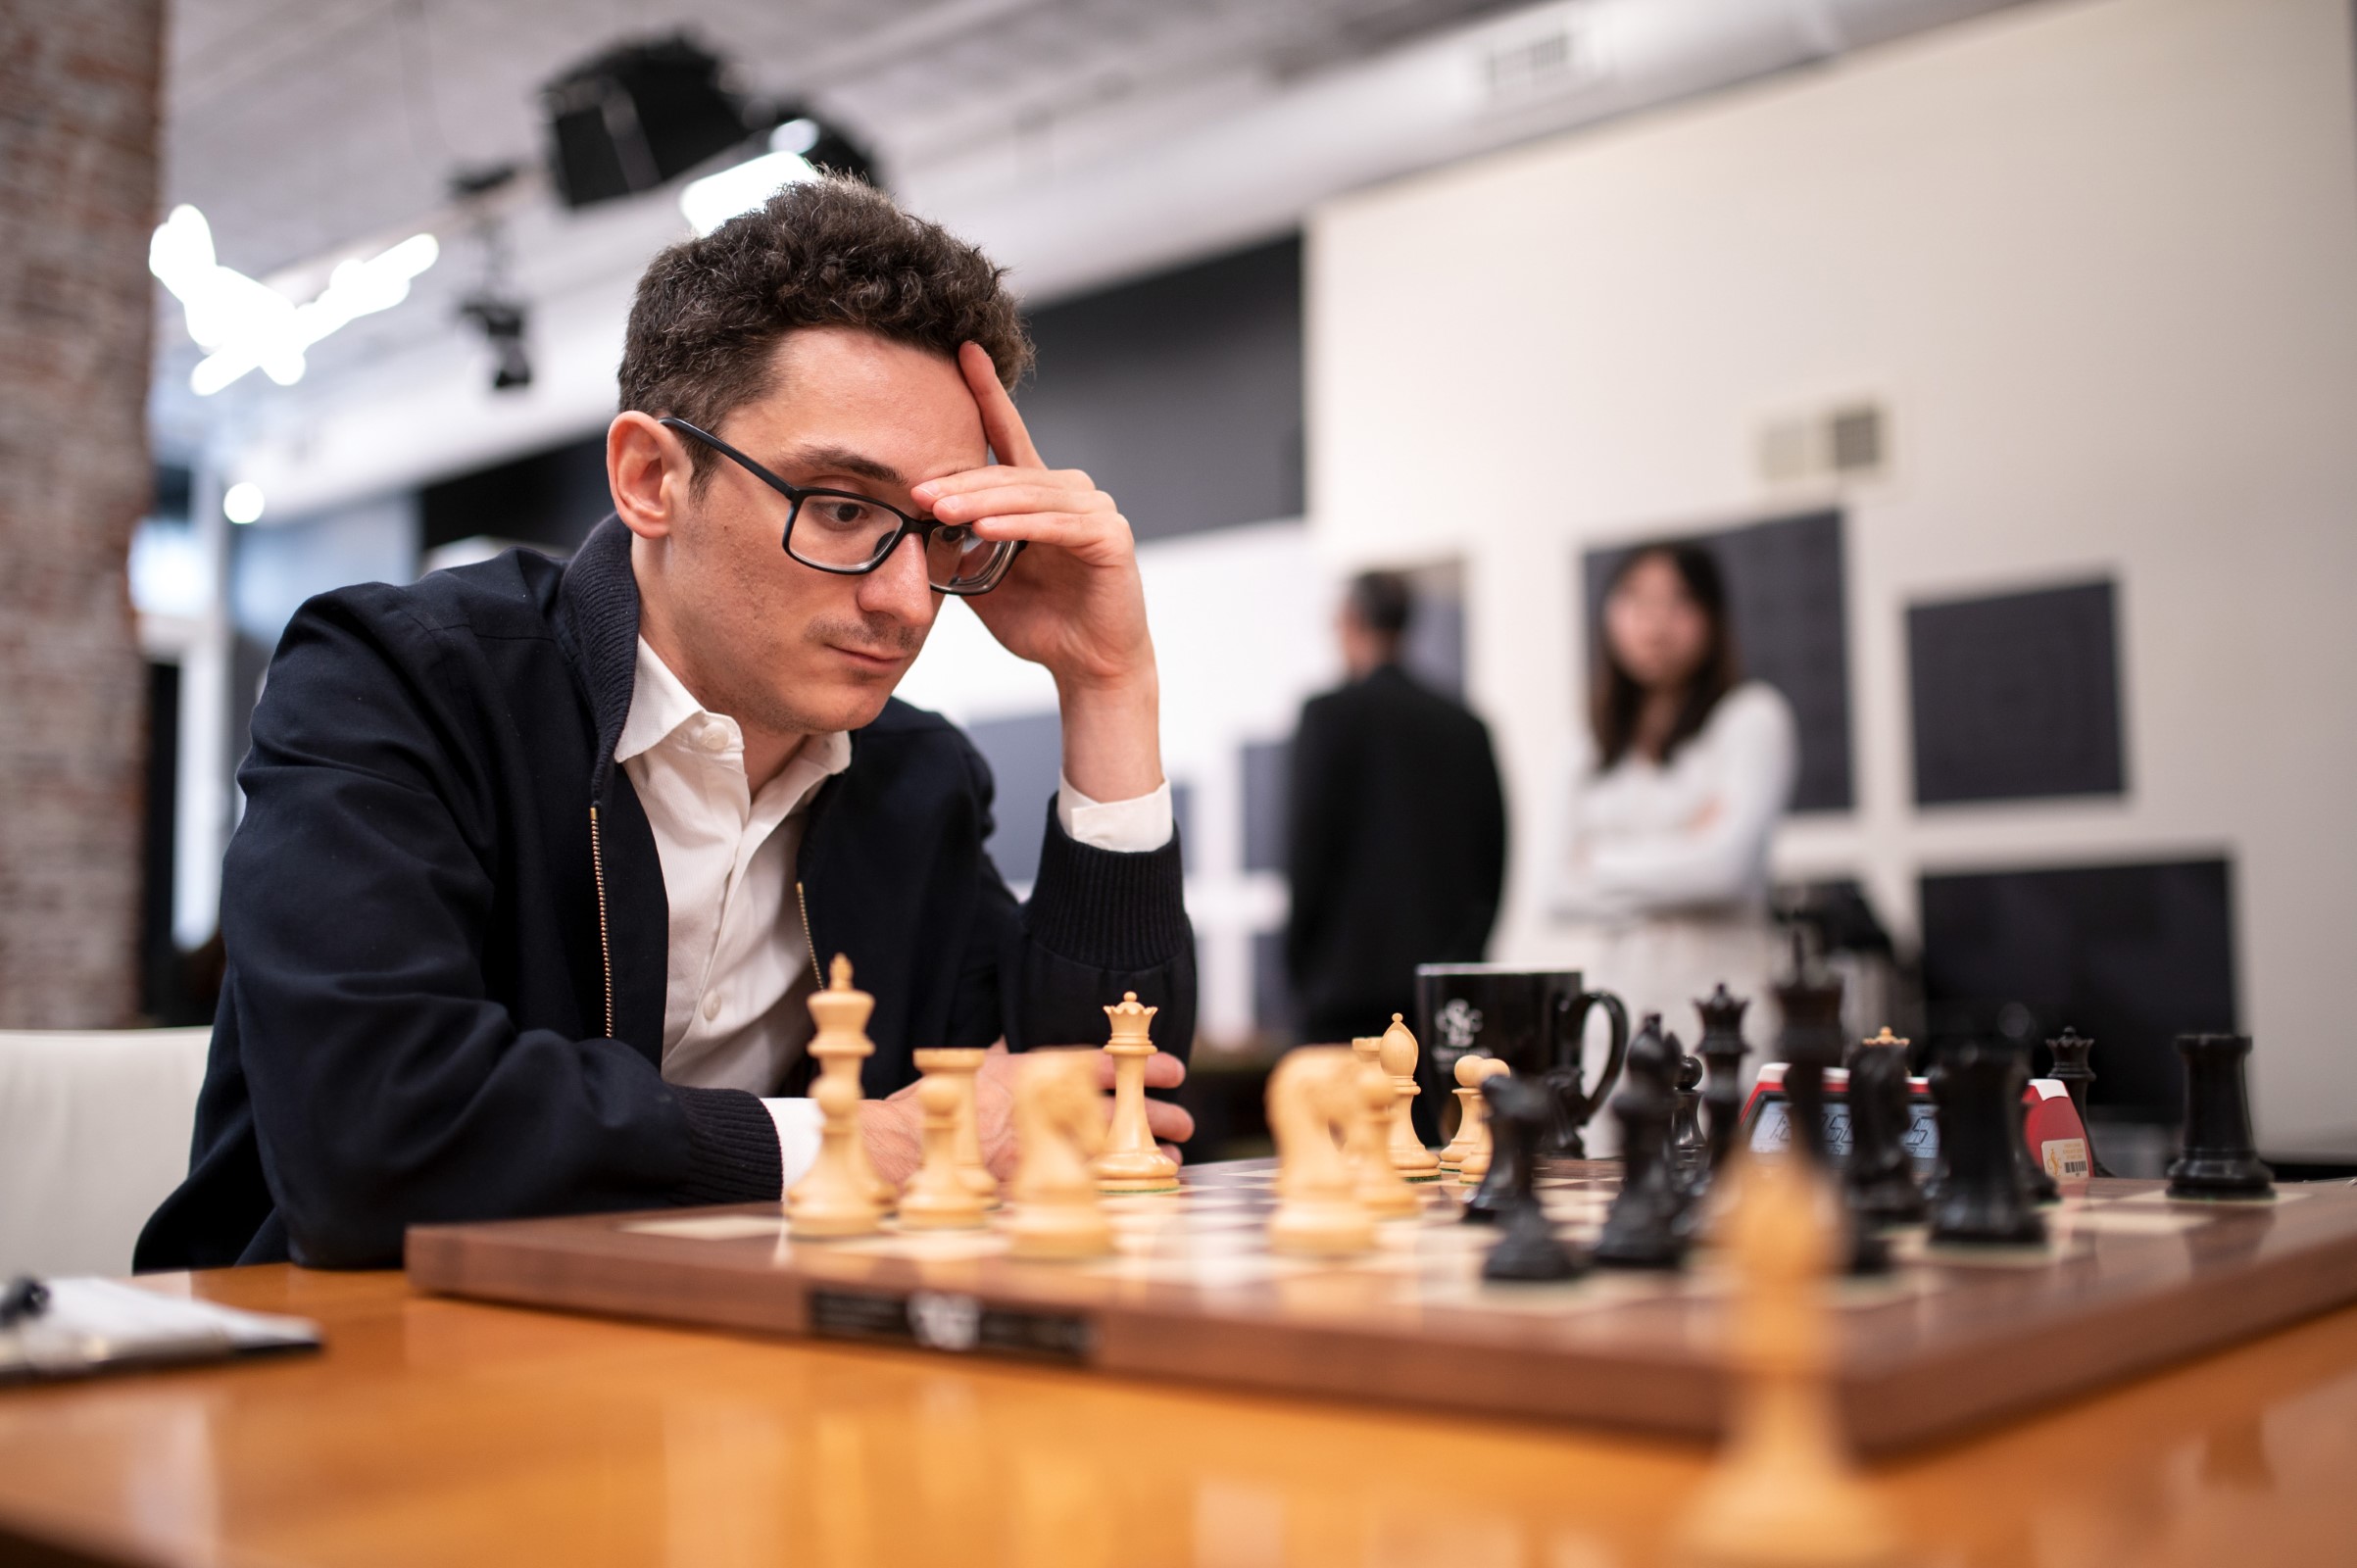 The home of championship chess in America